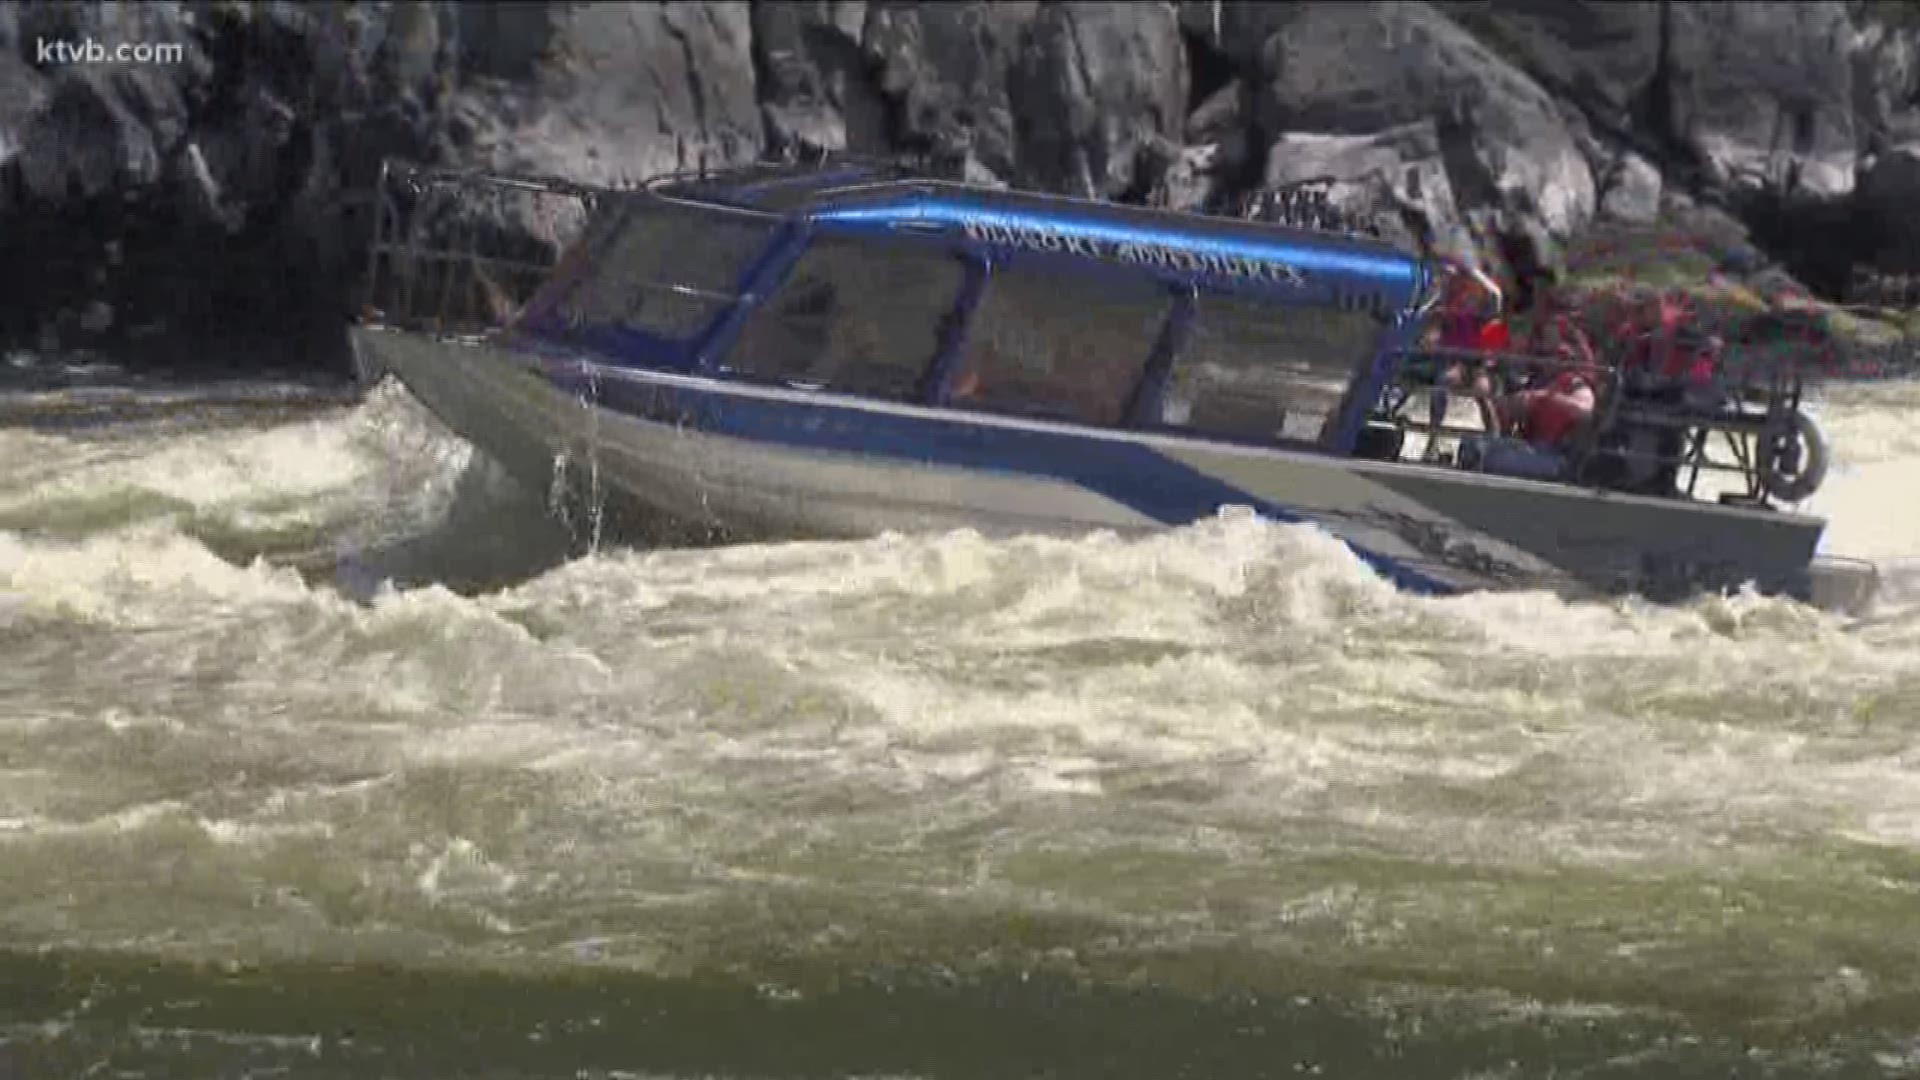 We go for a wild and scenic ride aboard a jet boat in the deepest canyon in North America.